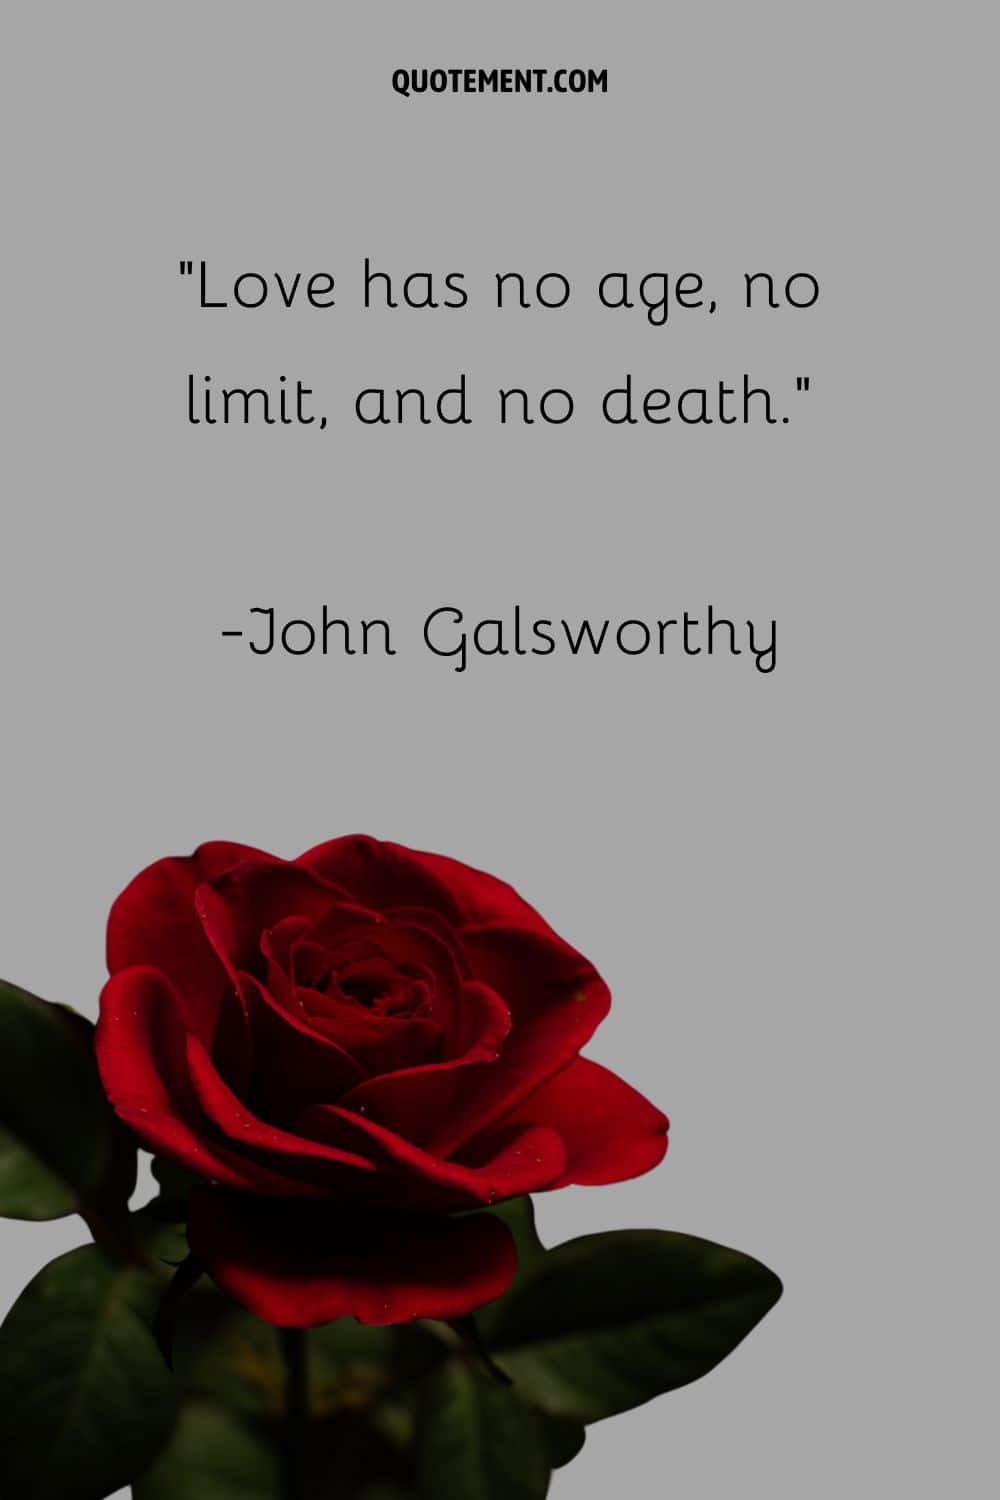 Image of a red rose representing death quote for loved ones.